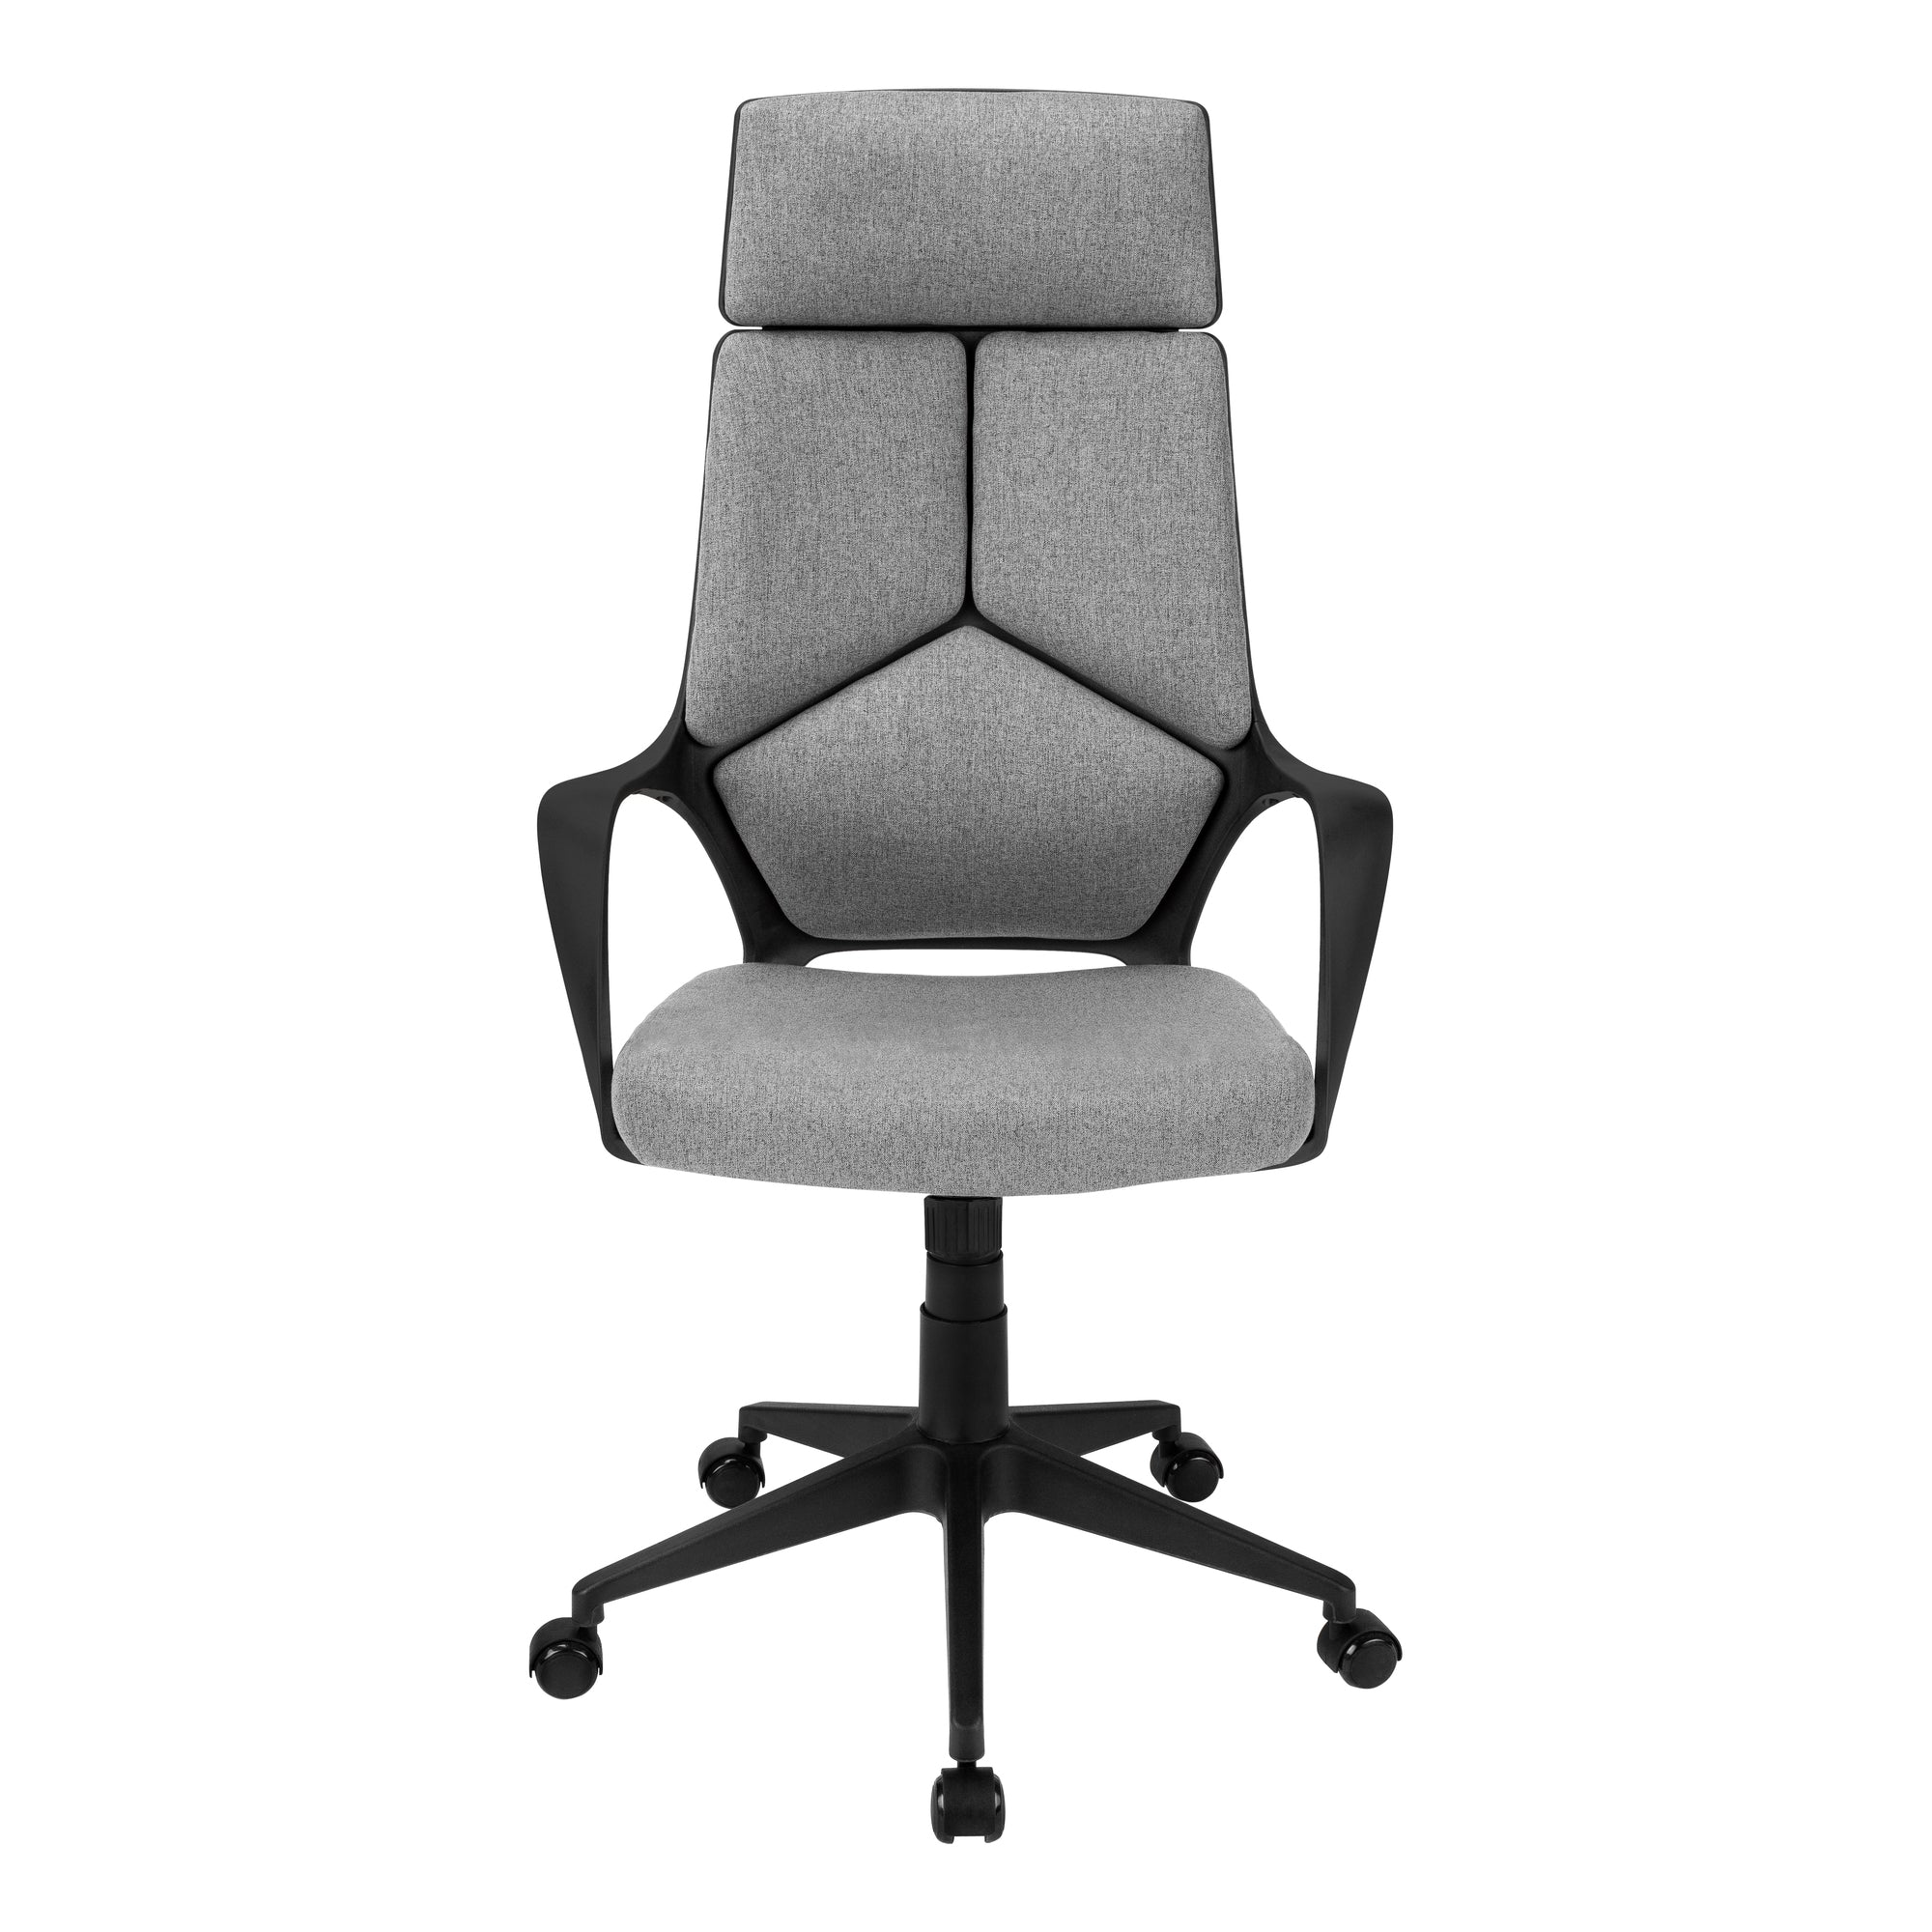 MN-207320    Office Chair, Adjustable Height, Swivel, Ergonomic, Armrests, Computer Desk, Office, Metal Base, Fabric, Black, Grey, White, Contemporary, Modern